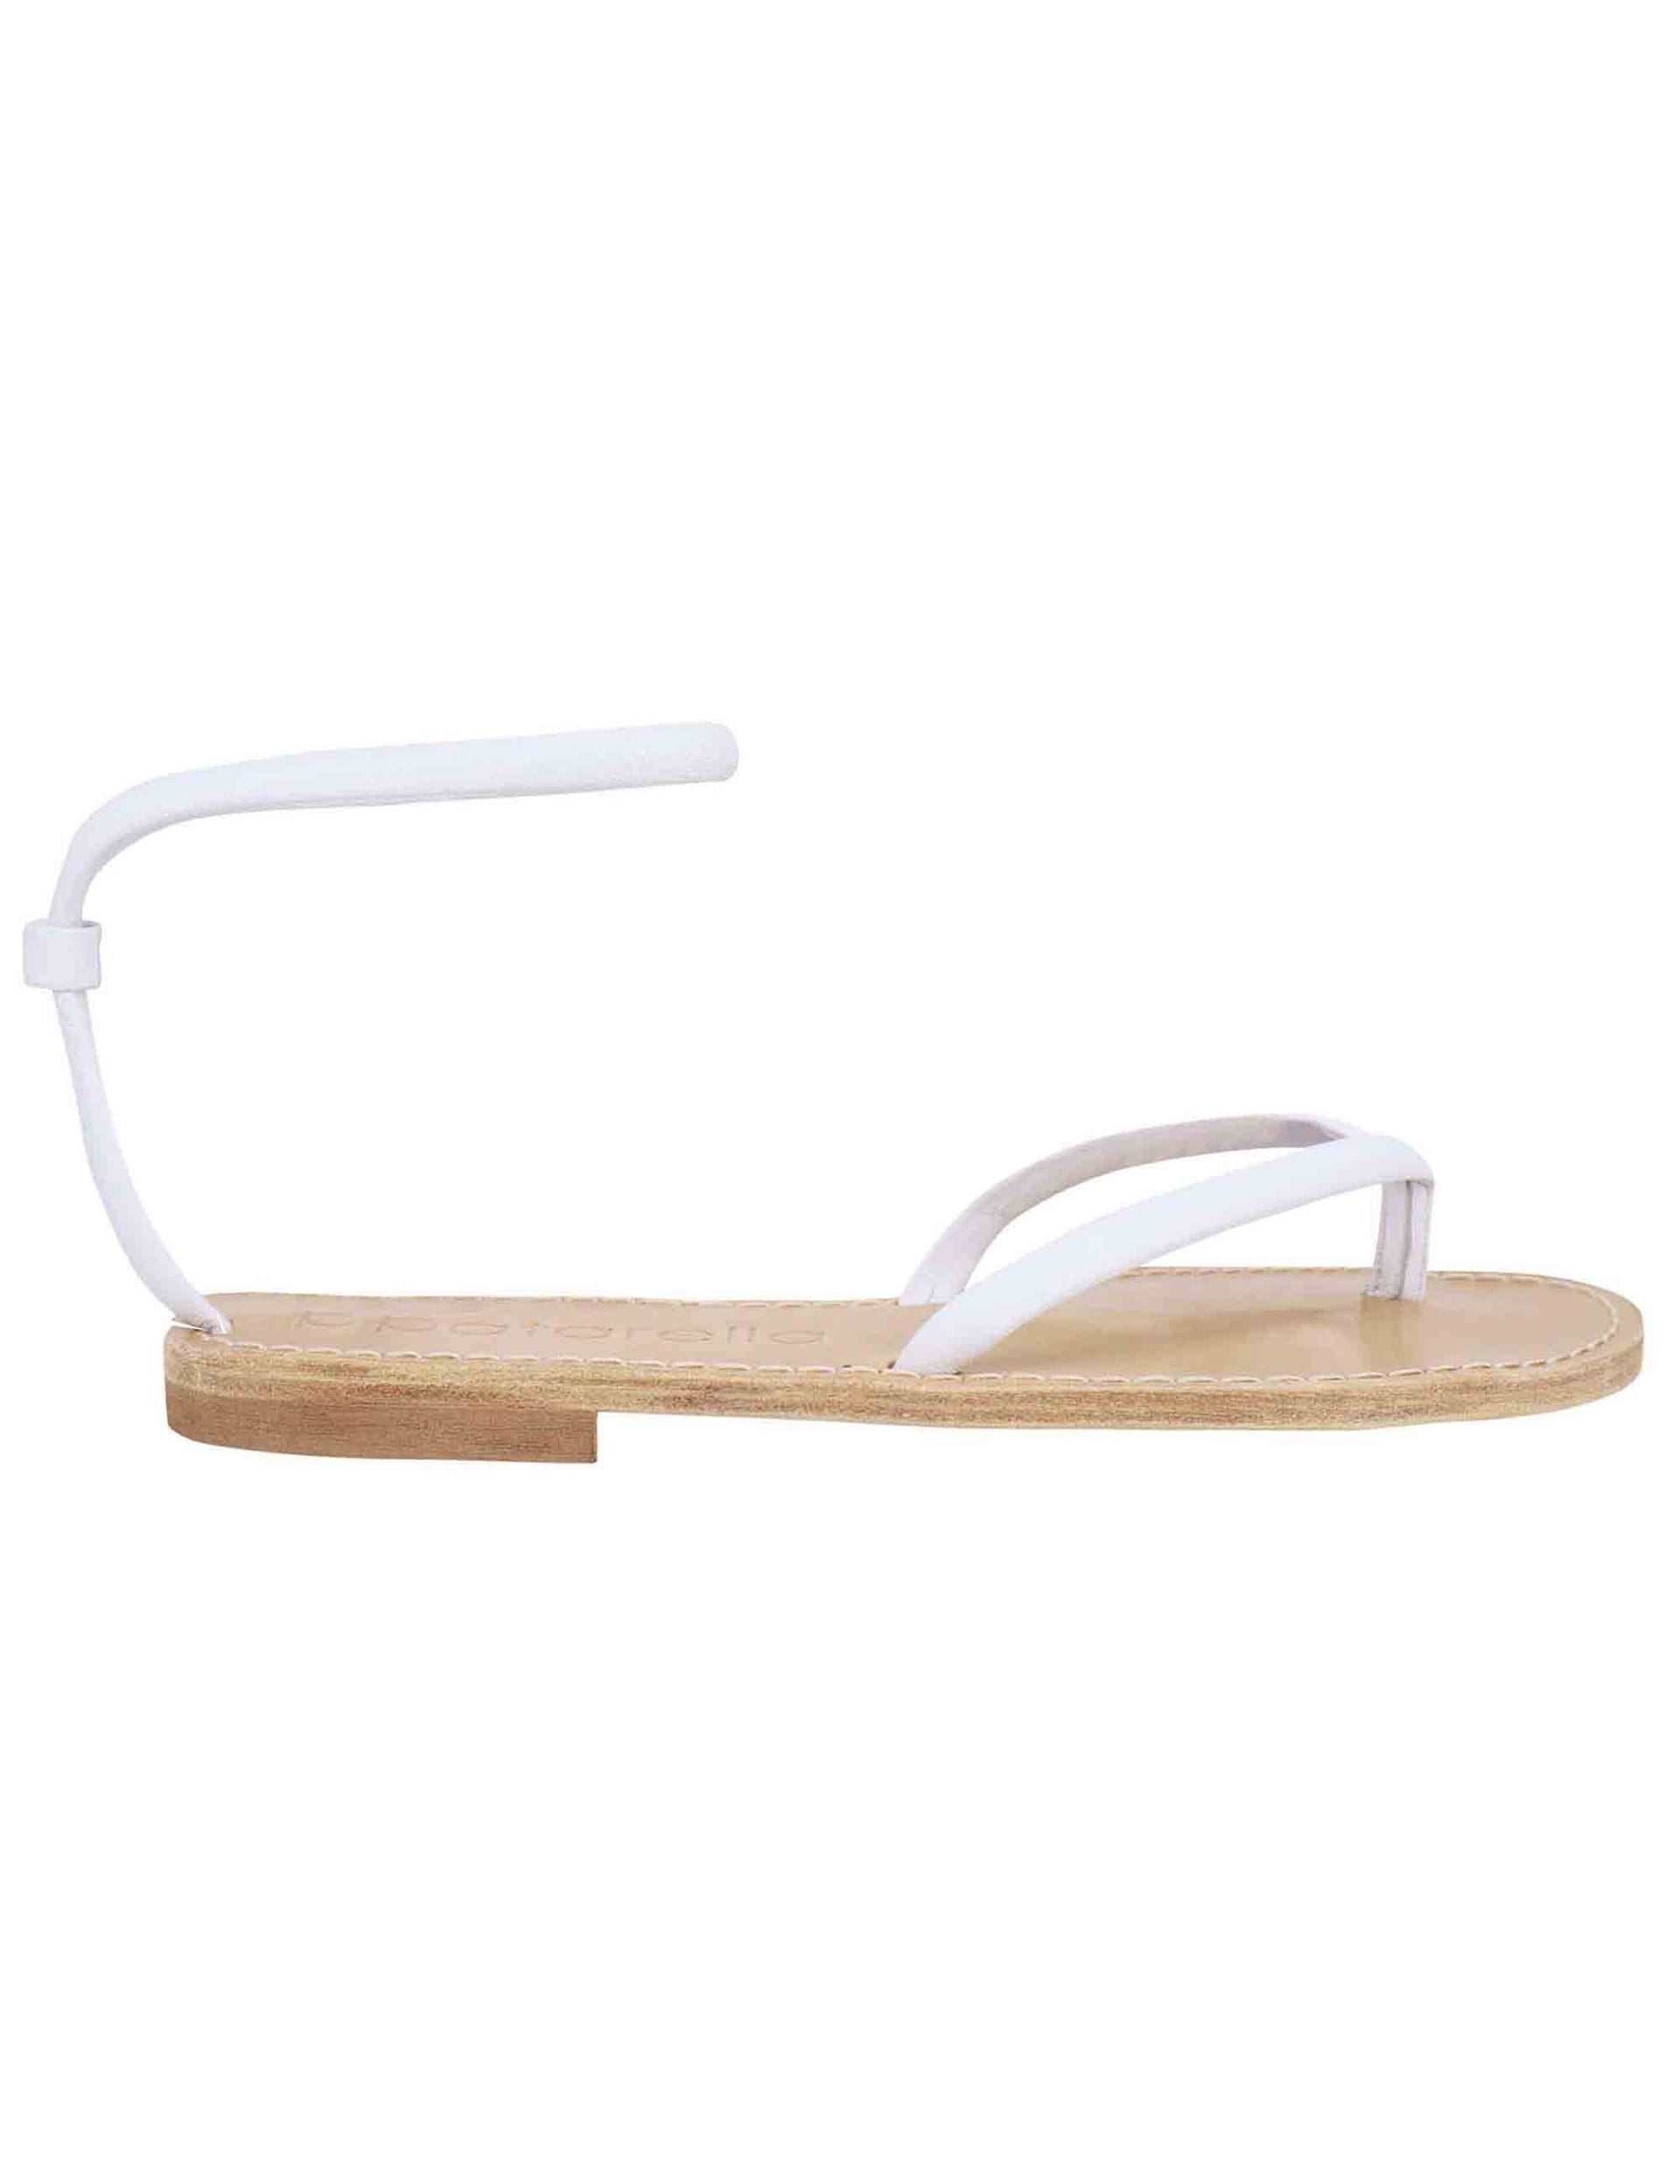 Women's flat flip-flop sandals in white leather with anklet